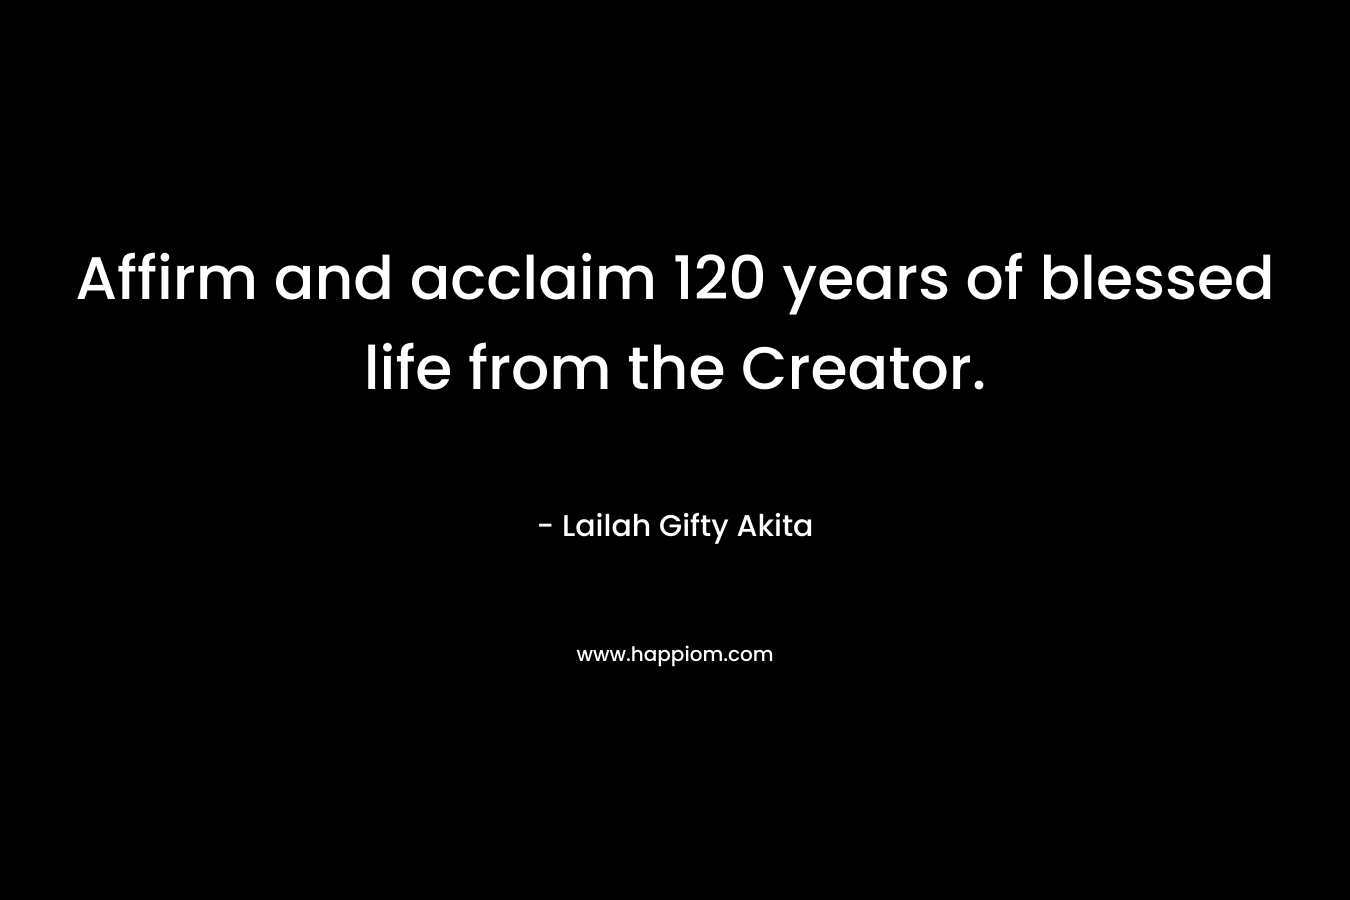 Affirm and acclaim 120 years of blessed life from the Creator. – Lailah Gifty Akita